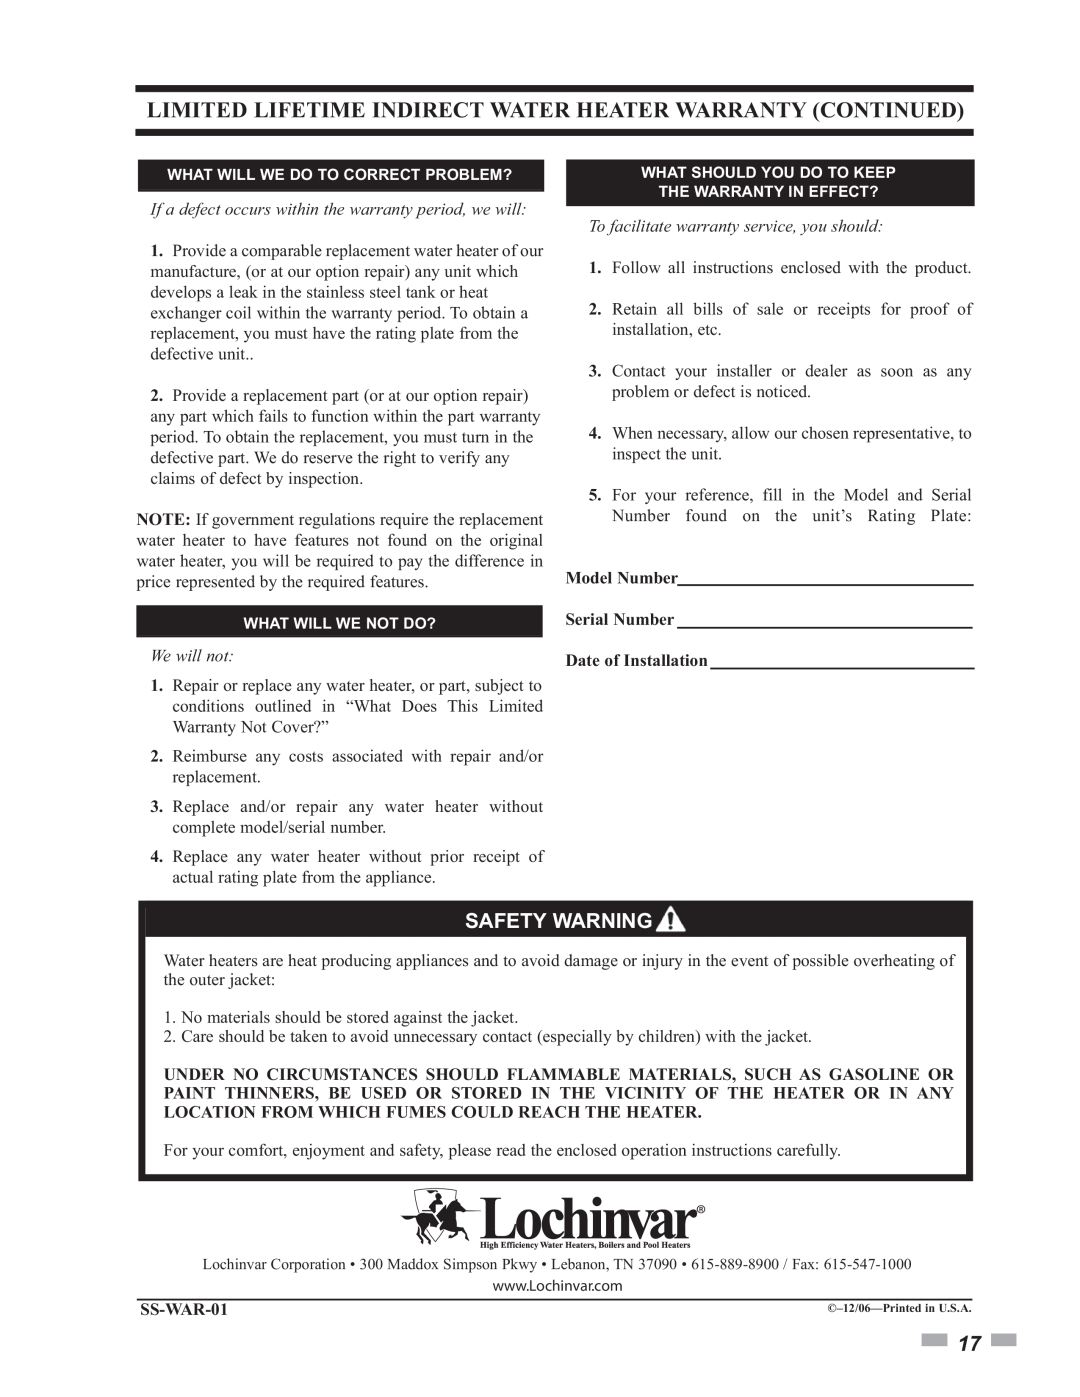 Lochinvar SSS03 operation manual Safety Warning, We will not, To facilitate warranty service, you should, SS-WAR-01 